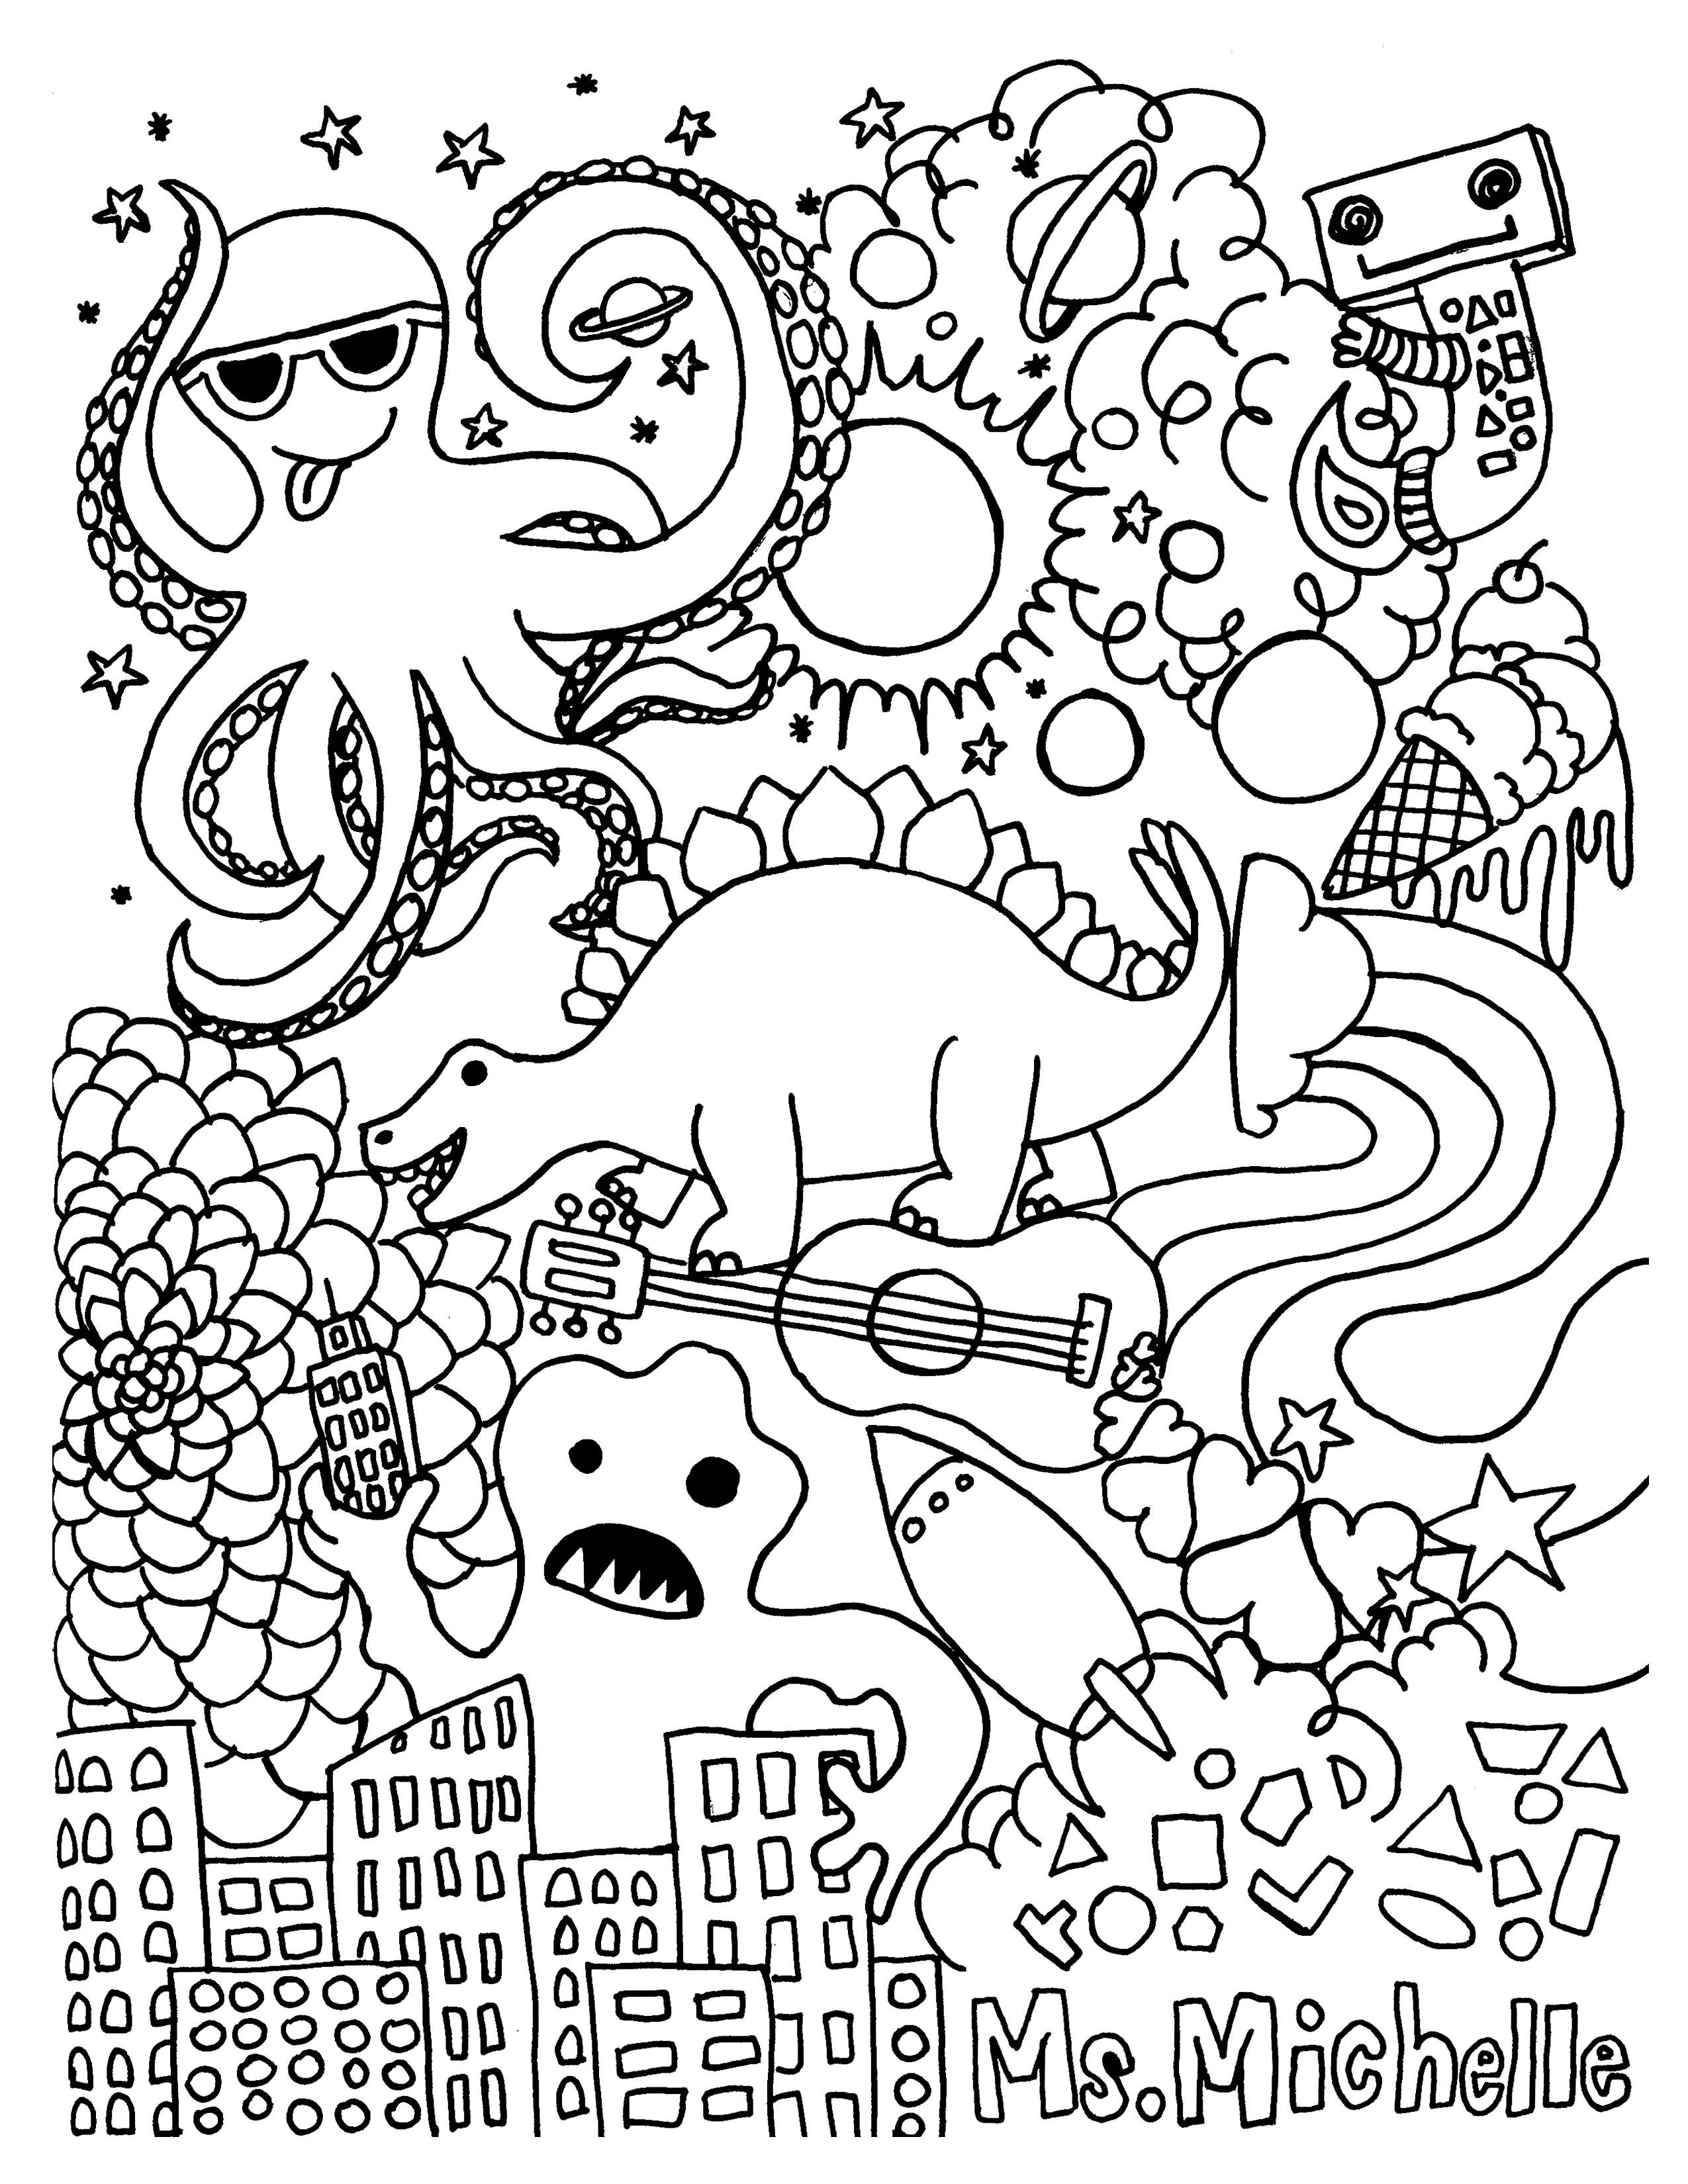 Coloring Pages For 5th Graders - Coloring